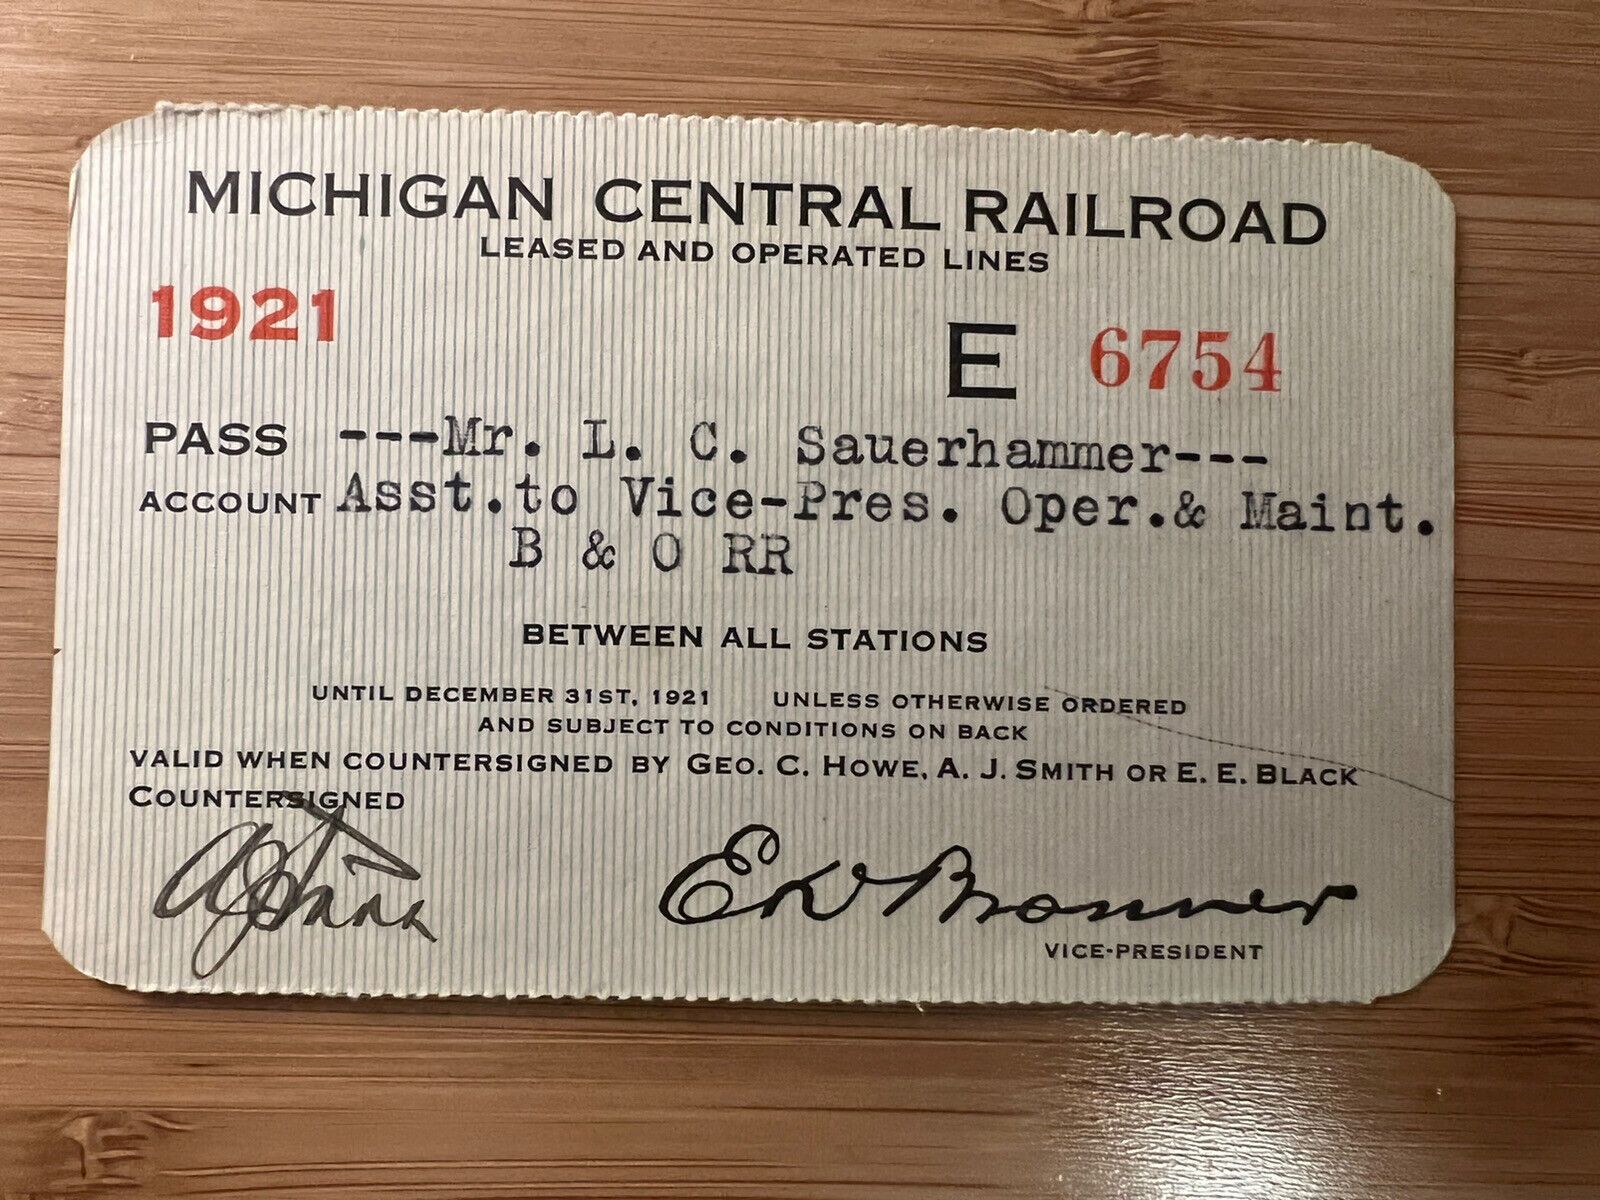 1921 MICHIGAN CENTRAL RAILROAD ANNUAL PASS BETWEEN ALL STATIONS - HH25